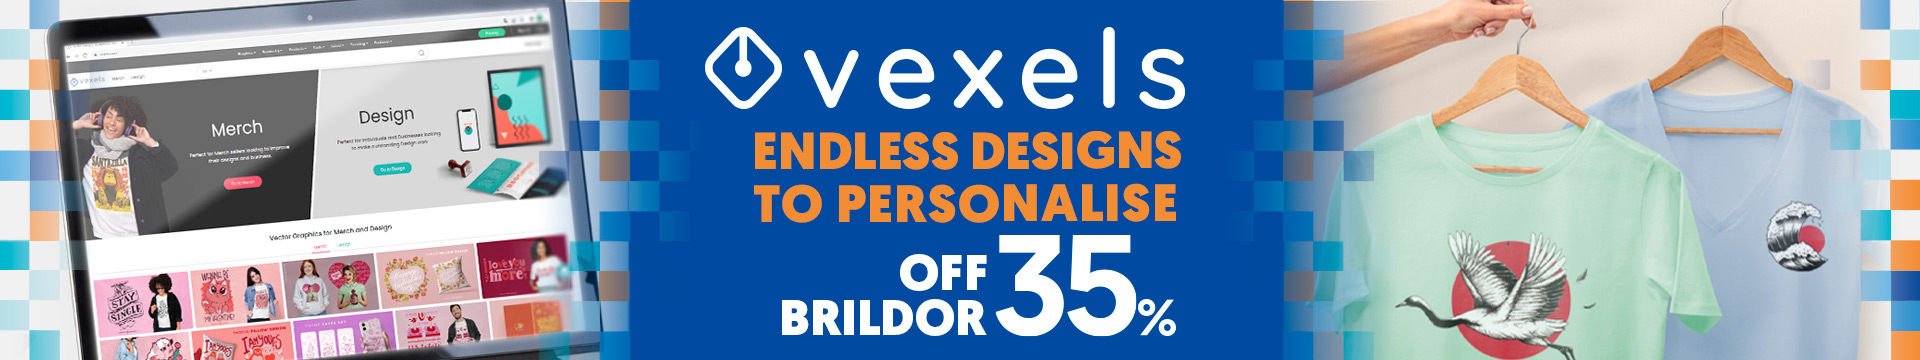 Vexels Promotion: Endless designs to personalise - Brildor 35% off